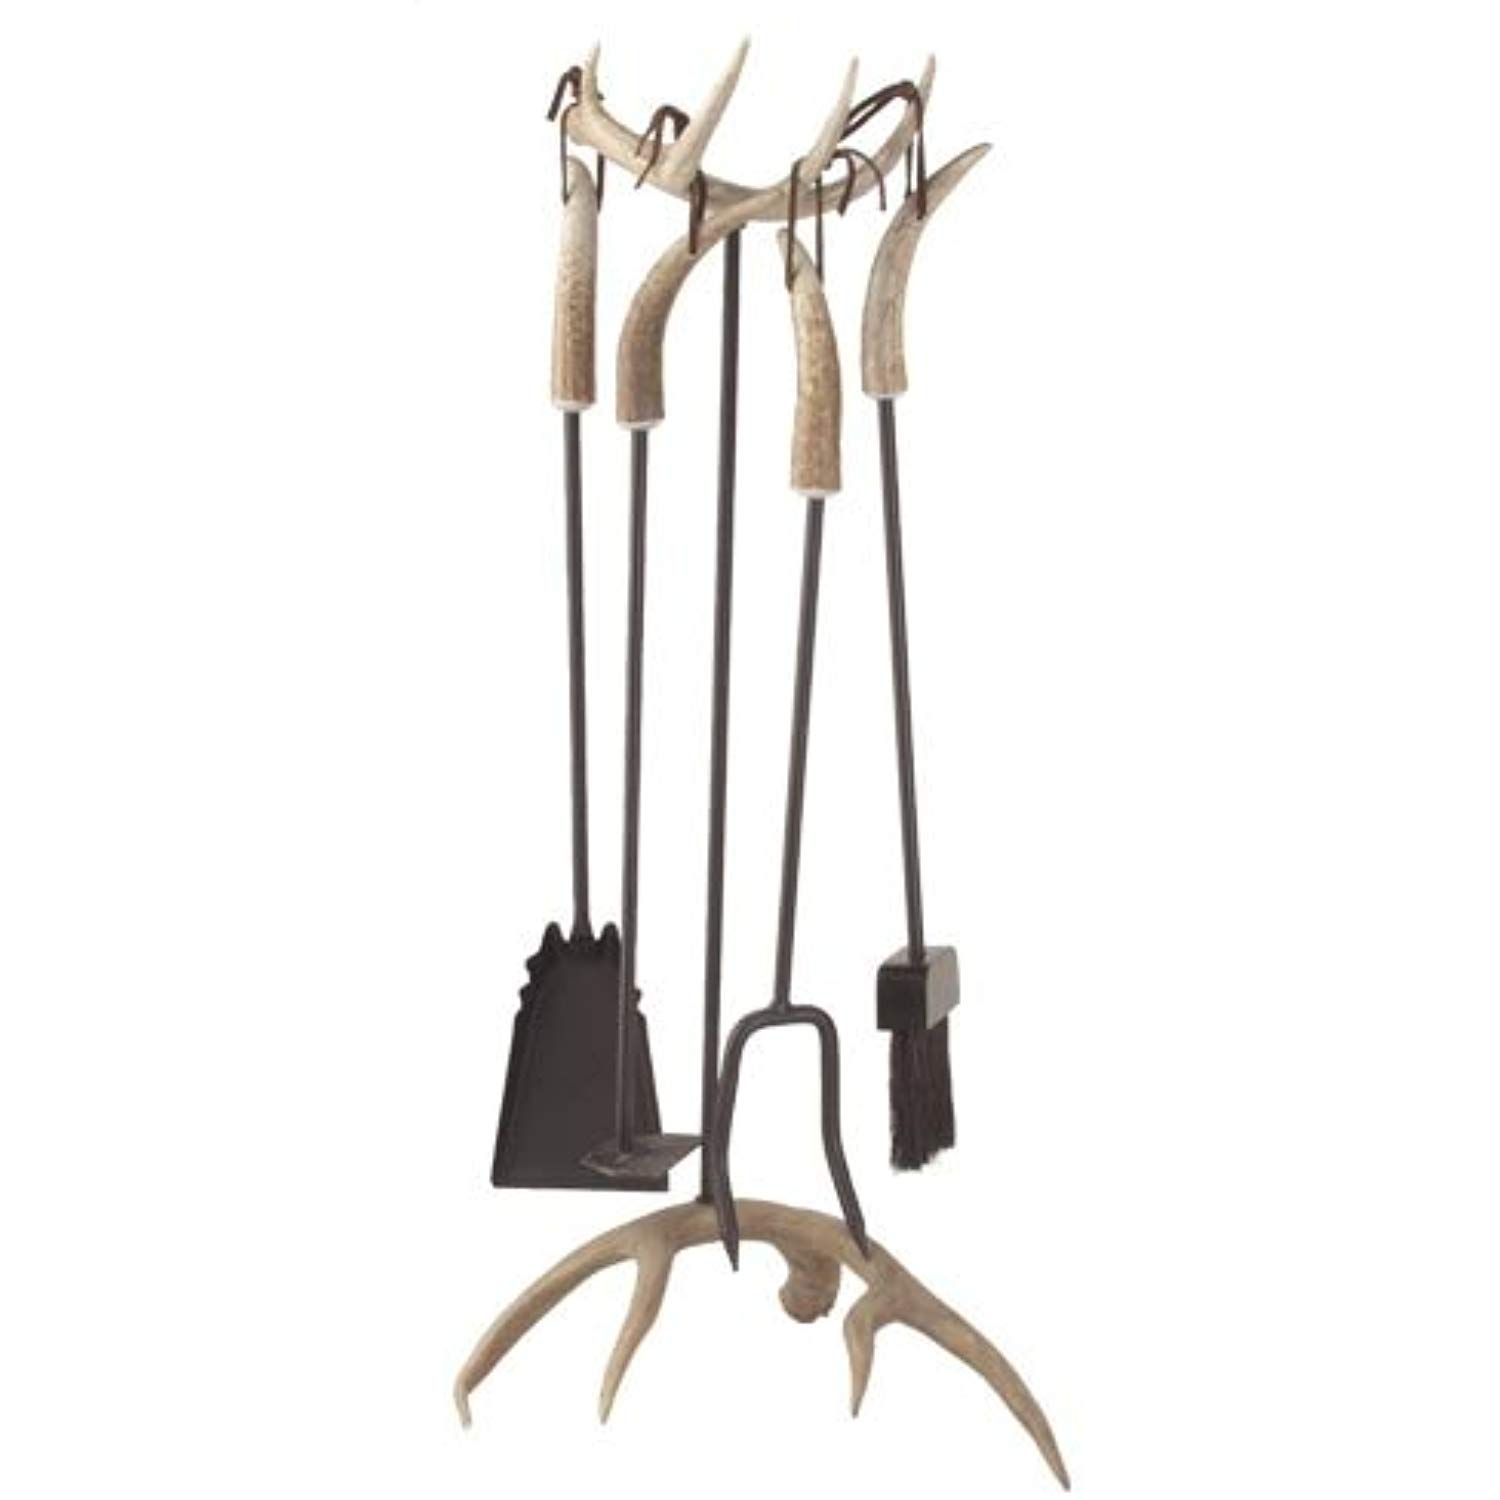 Fireplace Broom Awesome Antler Fireplace Set W 4 tools Bristle Brush Real Deer